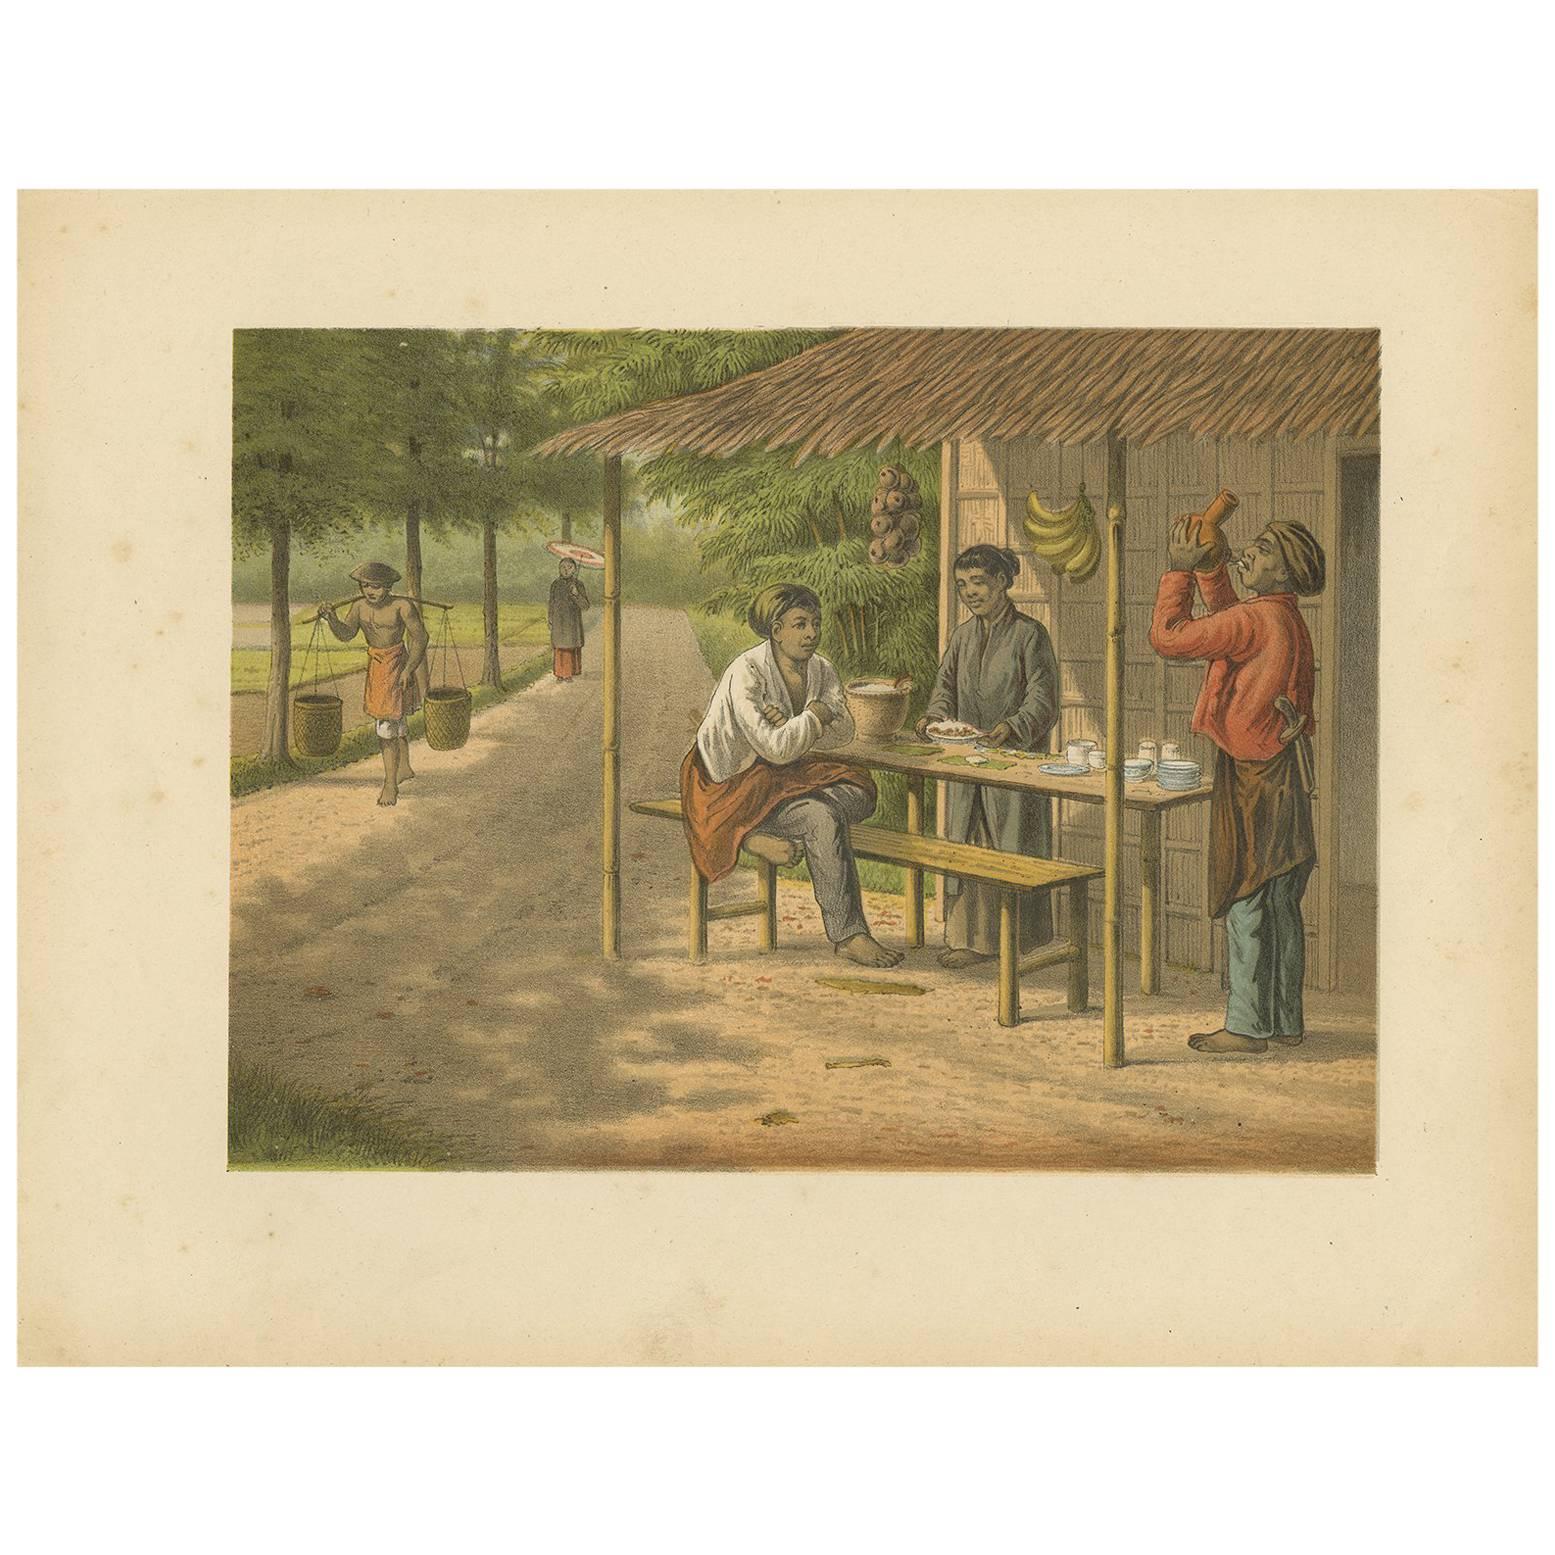 Antique Print of a Warung with Native People by M.T.H. Perelaer, 1888